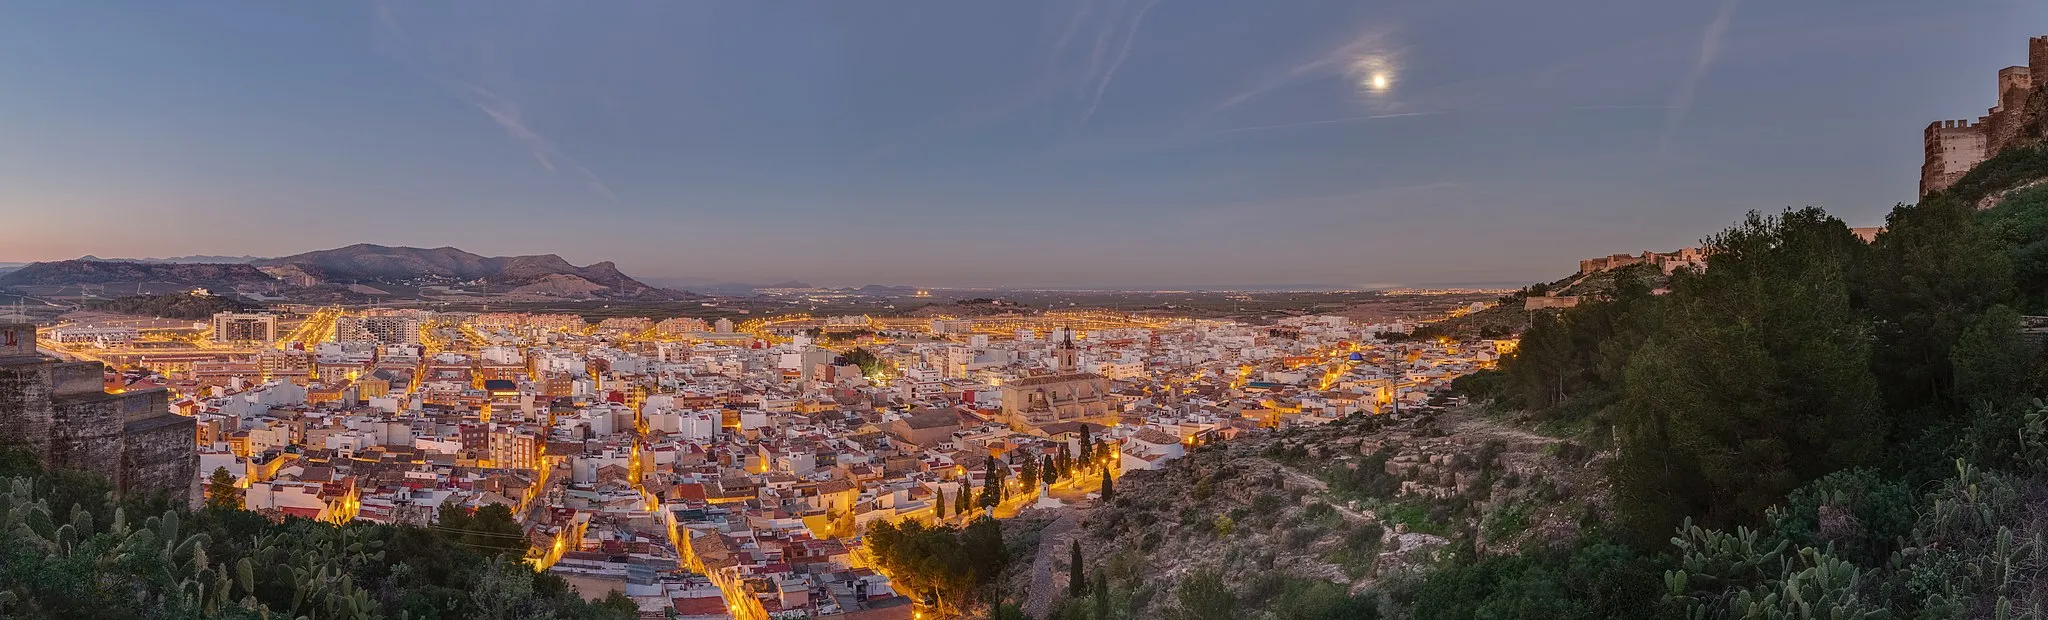 Photo showing: View of the former roman city of Sagunto, Valencian Community, Spain, after sunset at the moon light from the hill where the castle is located.